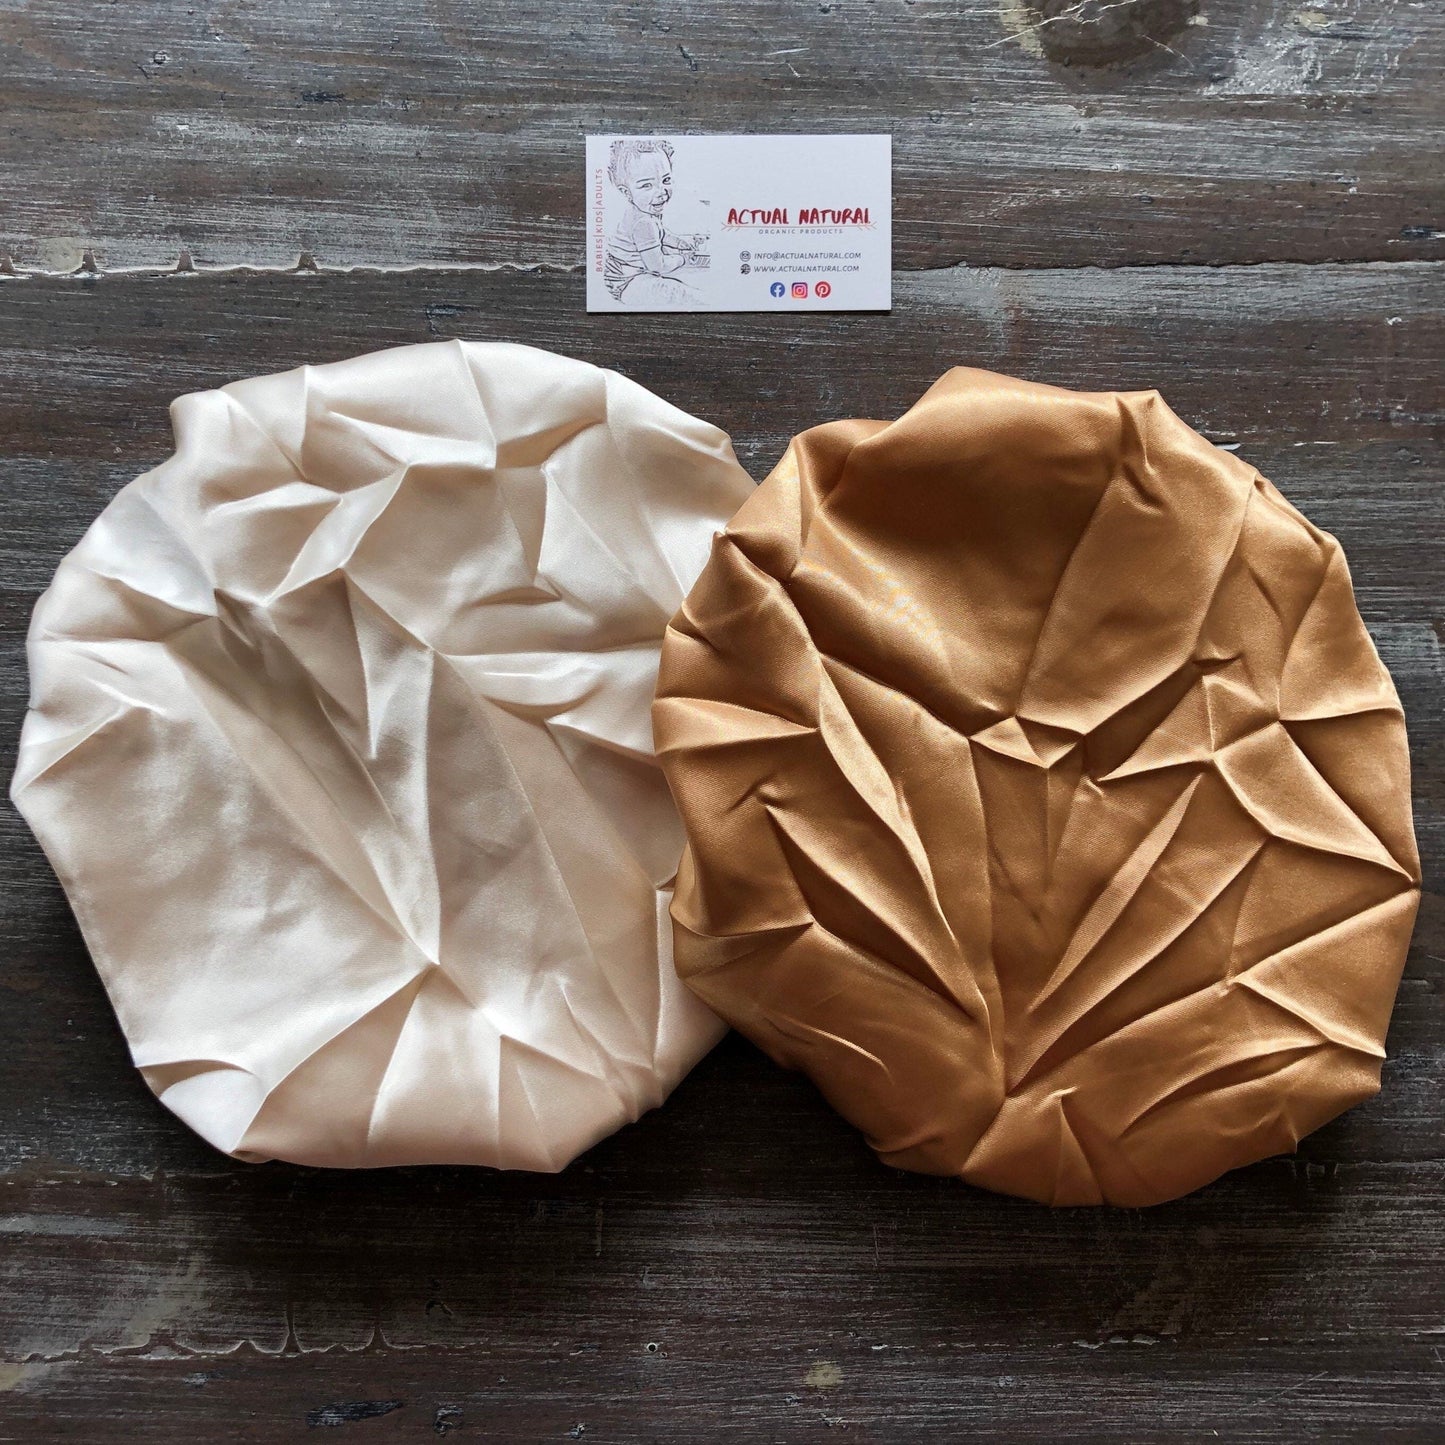 Reversible Satin Baby and Adult Bonnet